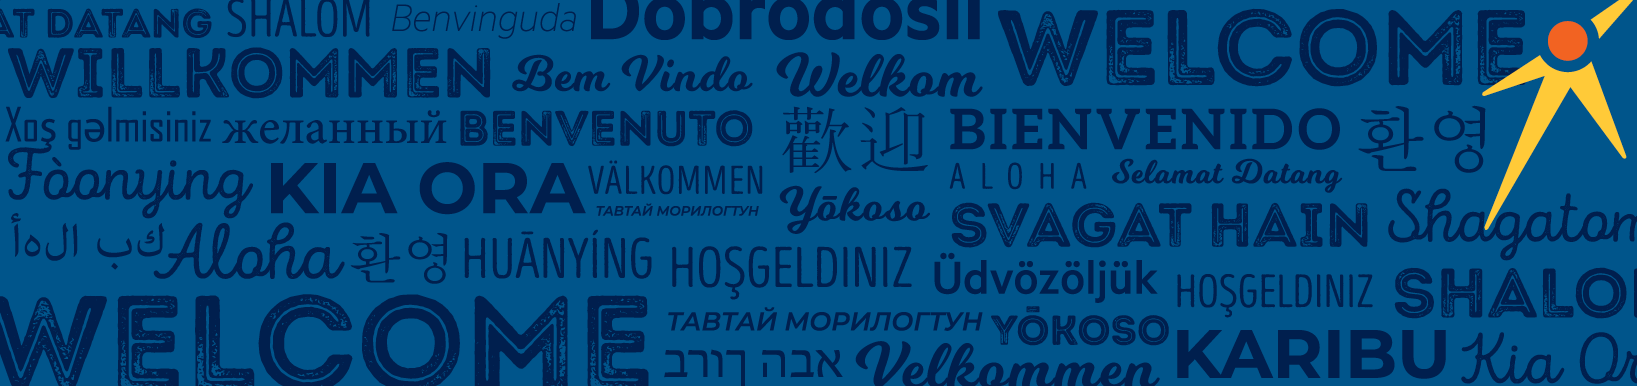 International Welcome Banner with Welcome in many languages